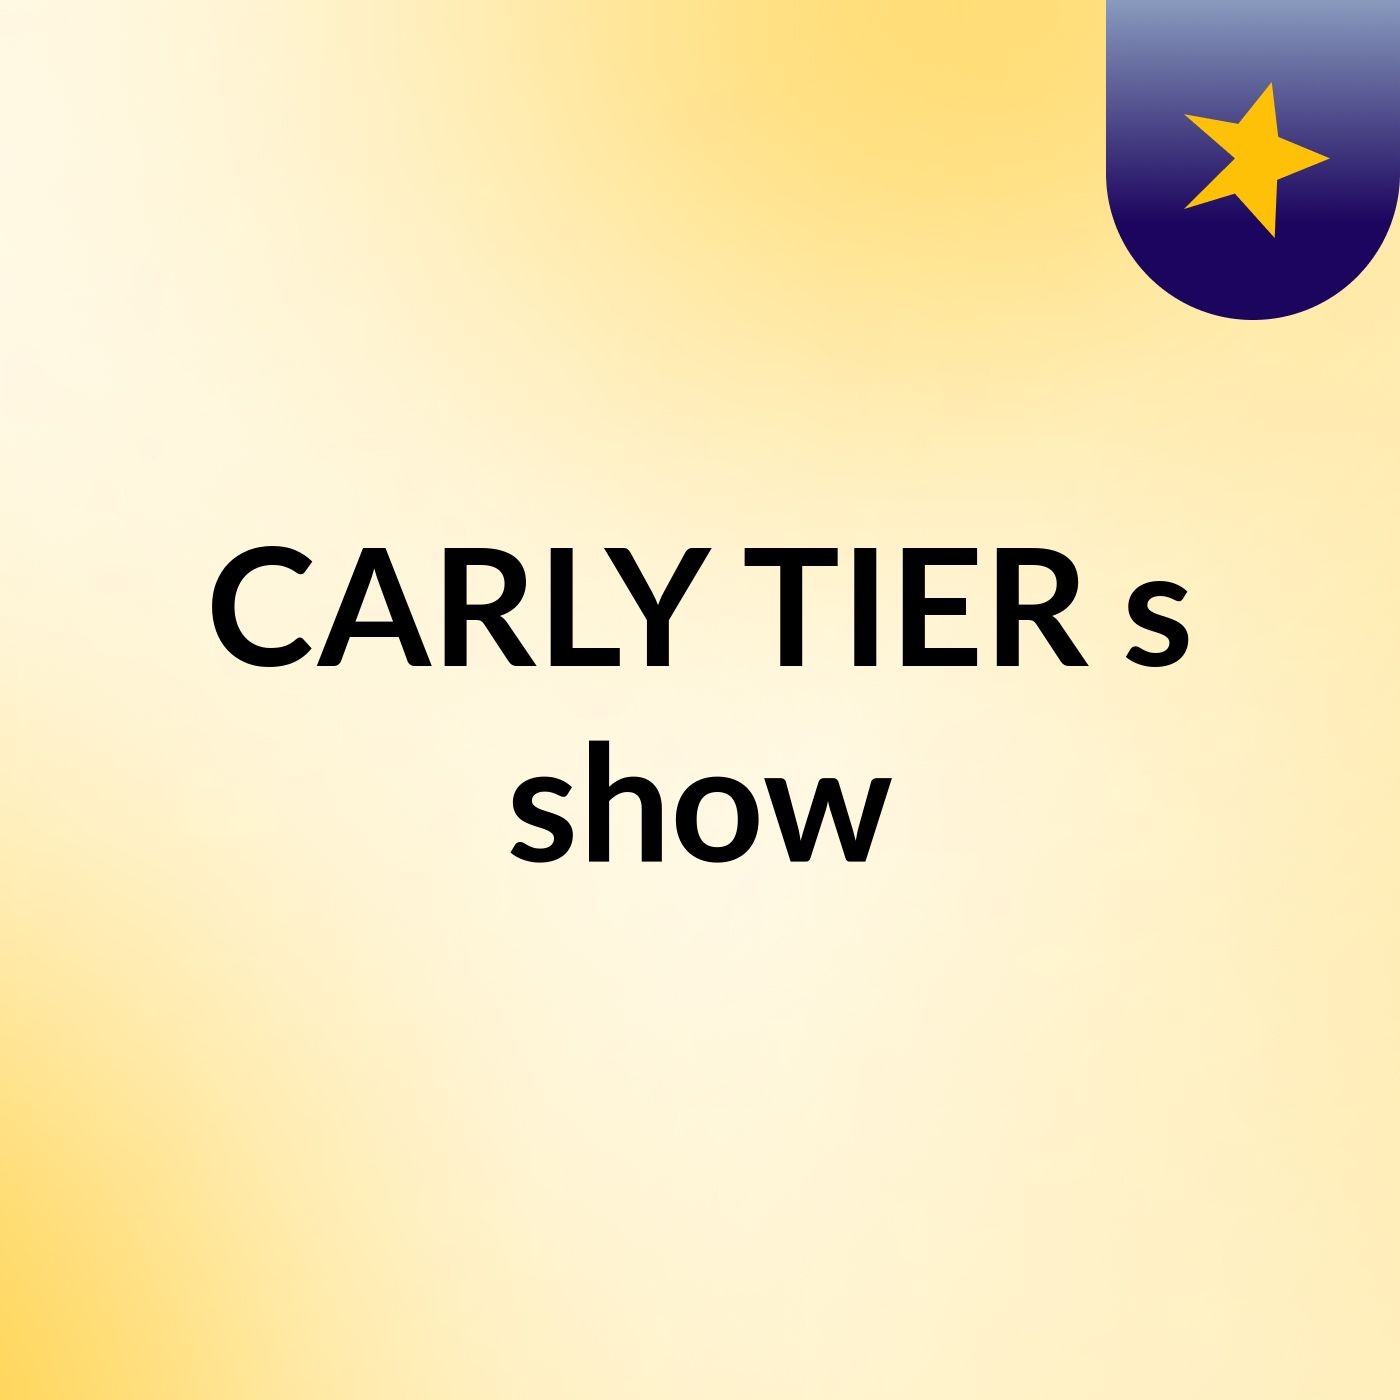 CARLY TIER's show